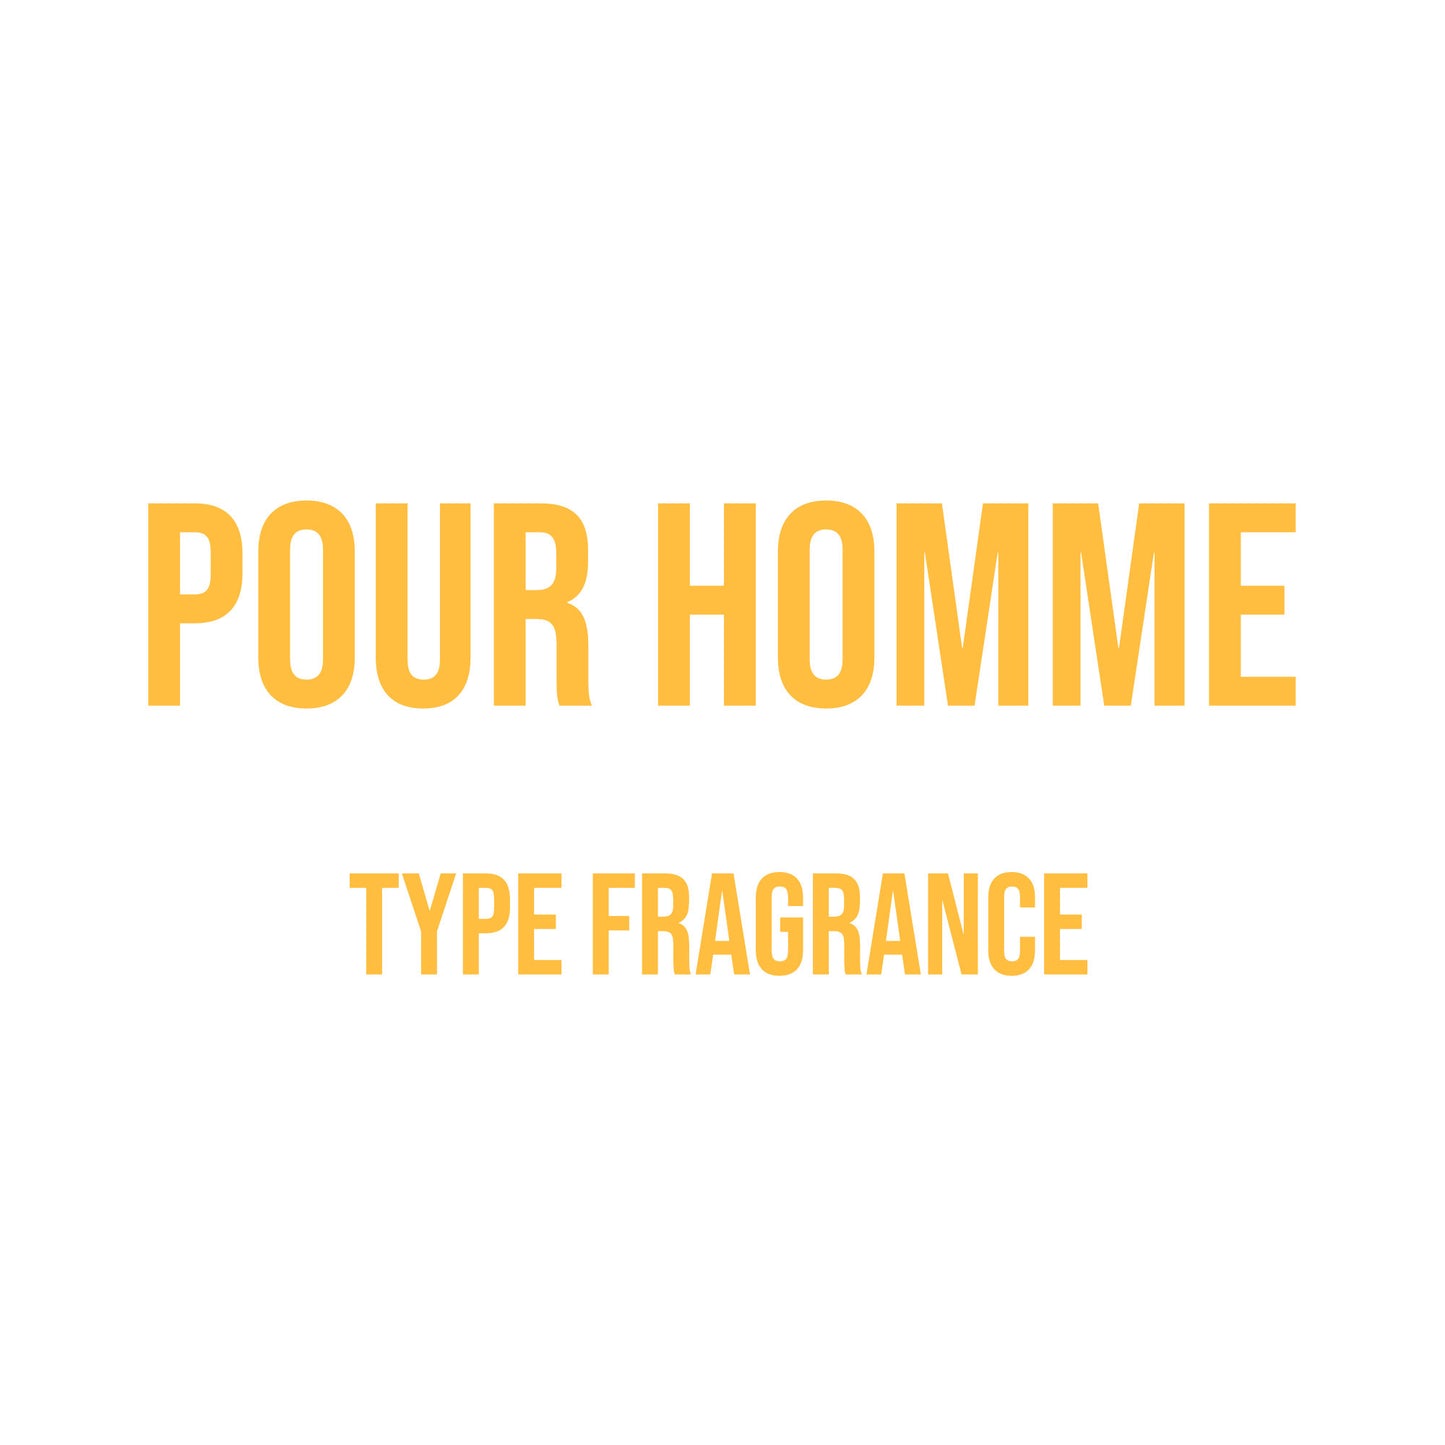 Pour Homme Type Fragrance